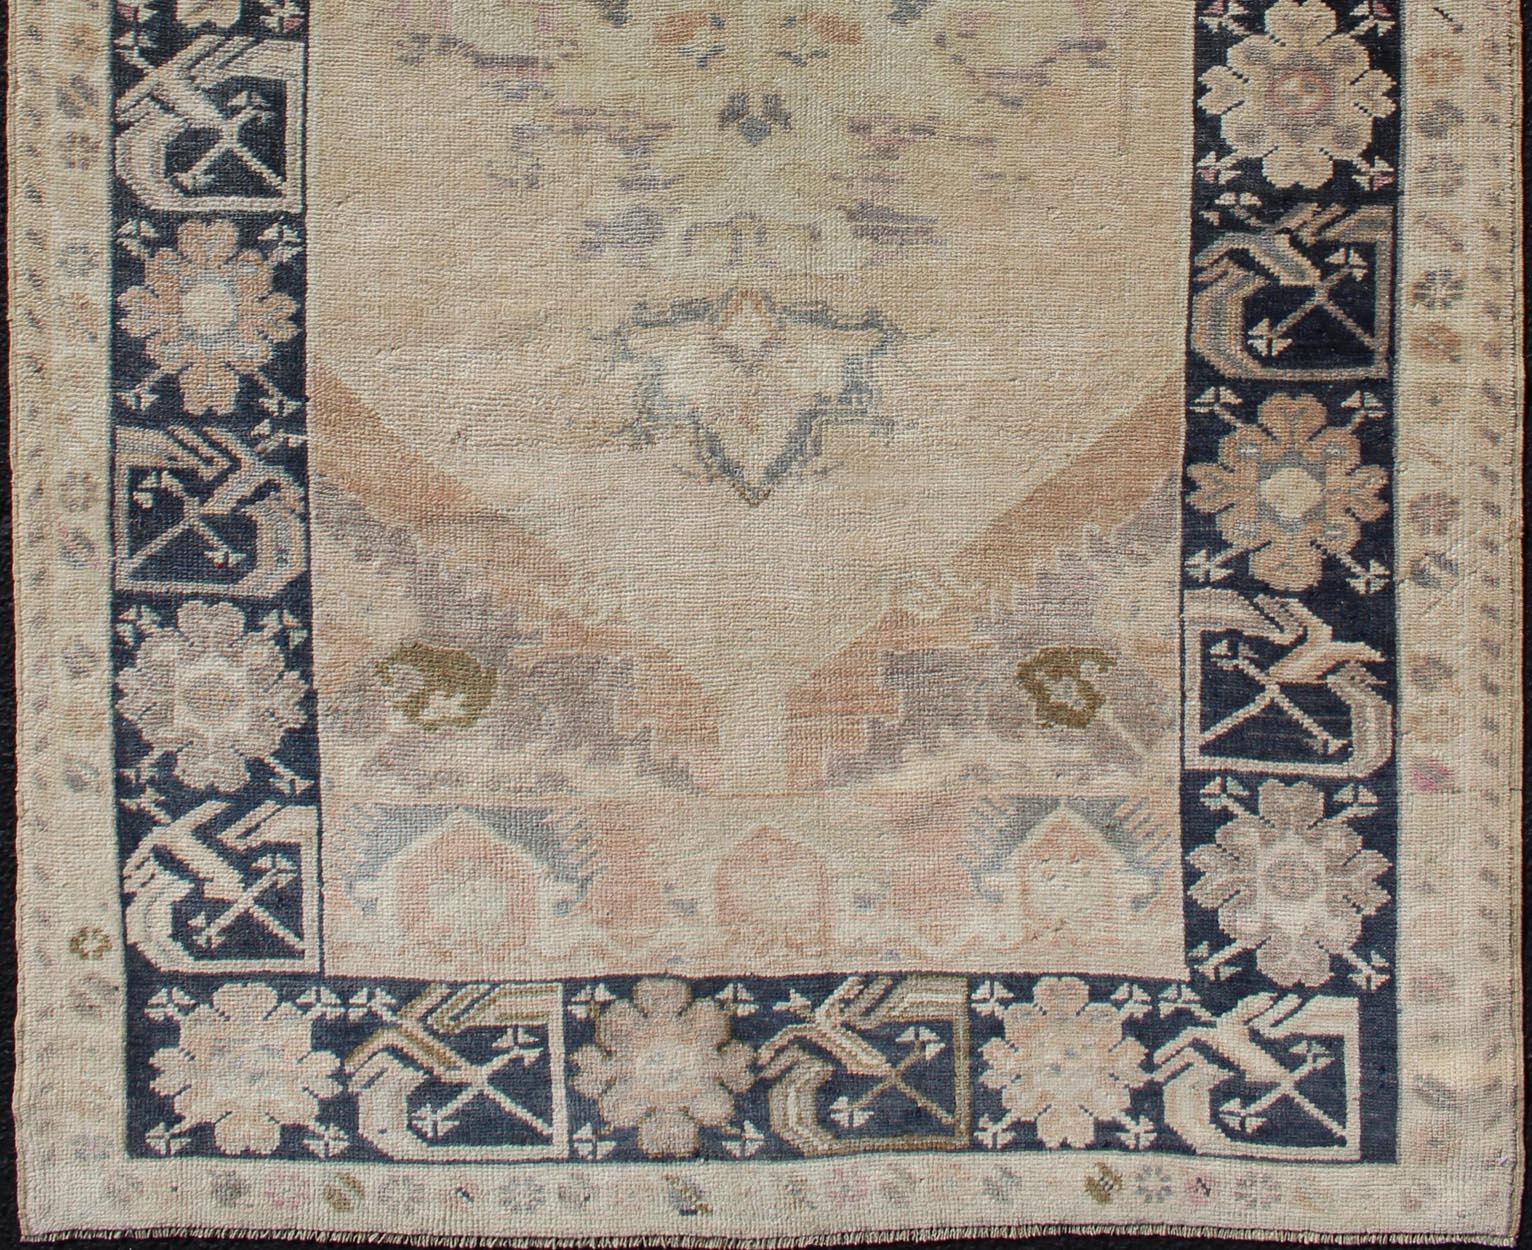 Vintage Oushak Rug in Tan & Navy Blue With Floral Medallion Design and Sub Geometric Border in boteh and botanical motifs. Keivan Woven Arts/ rug EN-179353, country of origin / type: Turkey / Oushak, circa 1940.

Measures:4 x 6'5

This striking